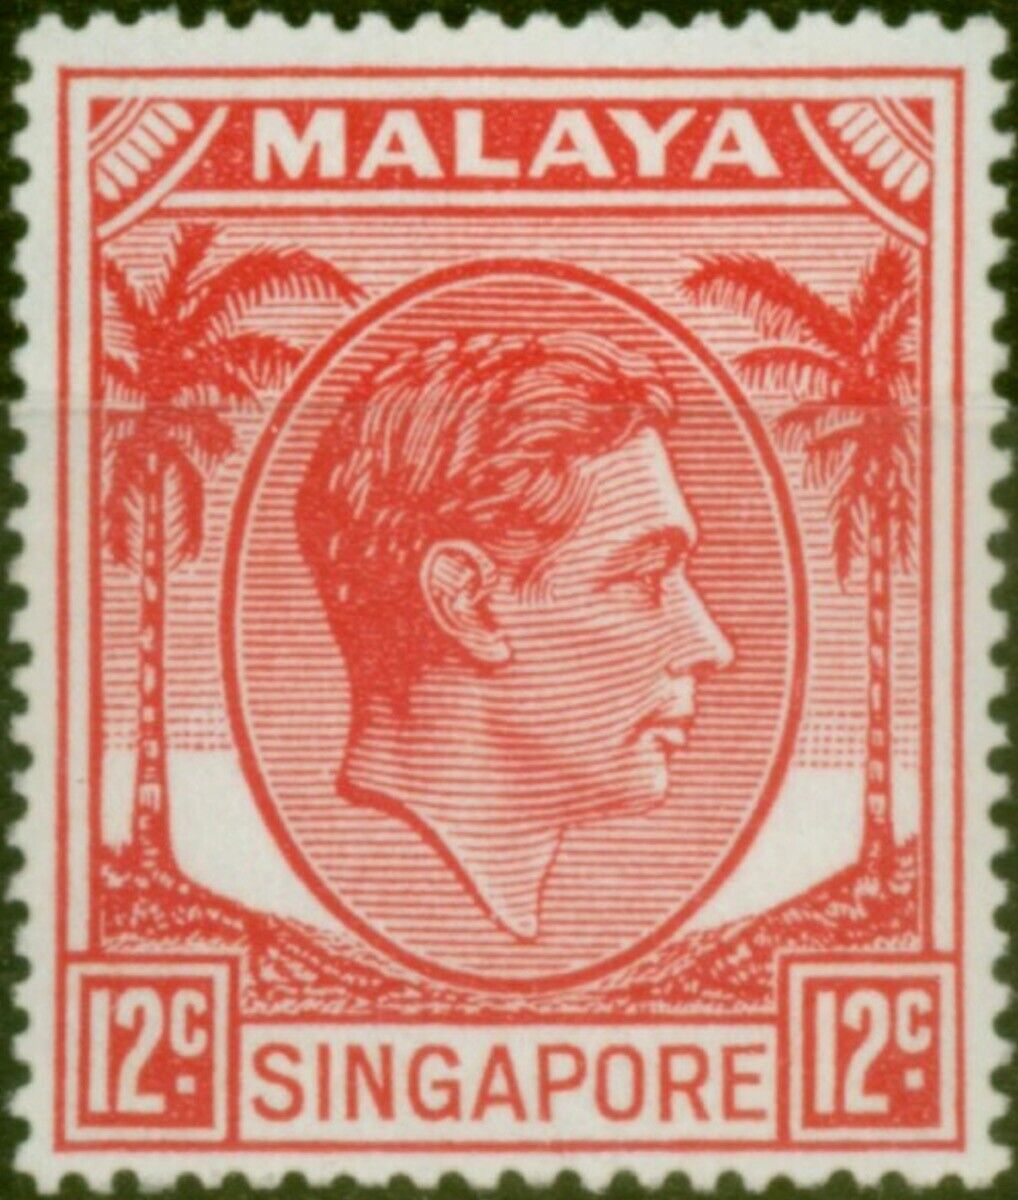 Discount mail order Singapore 1952 12c Scarlet SG22a Limited price sale LMM Fine